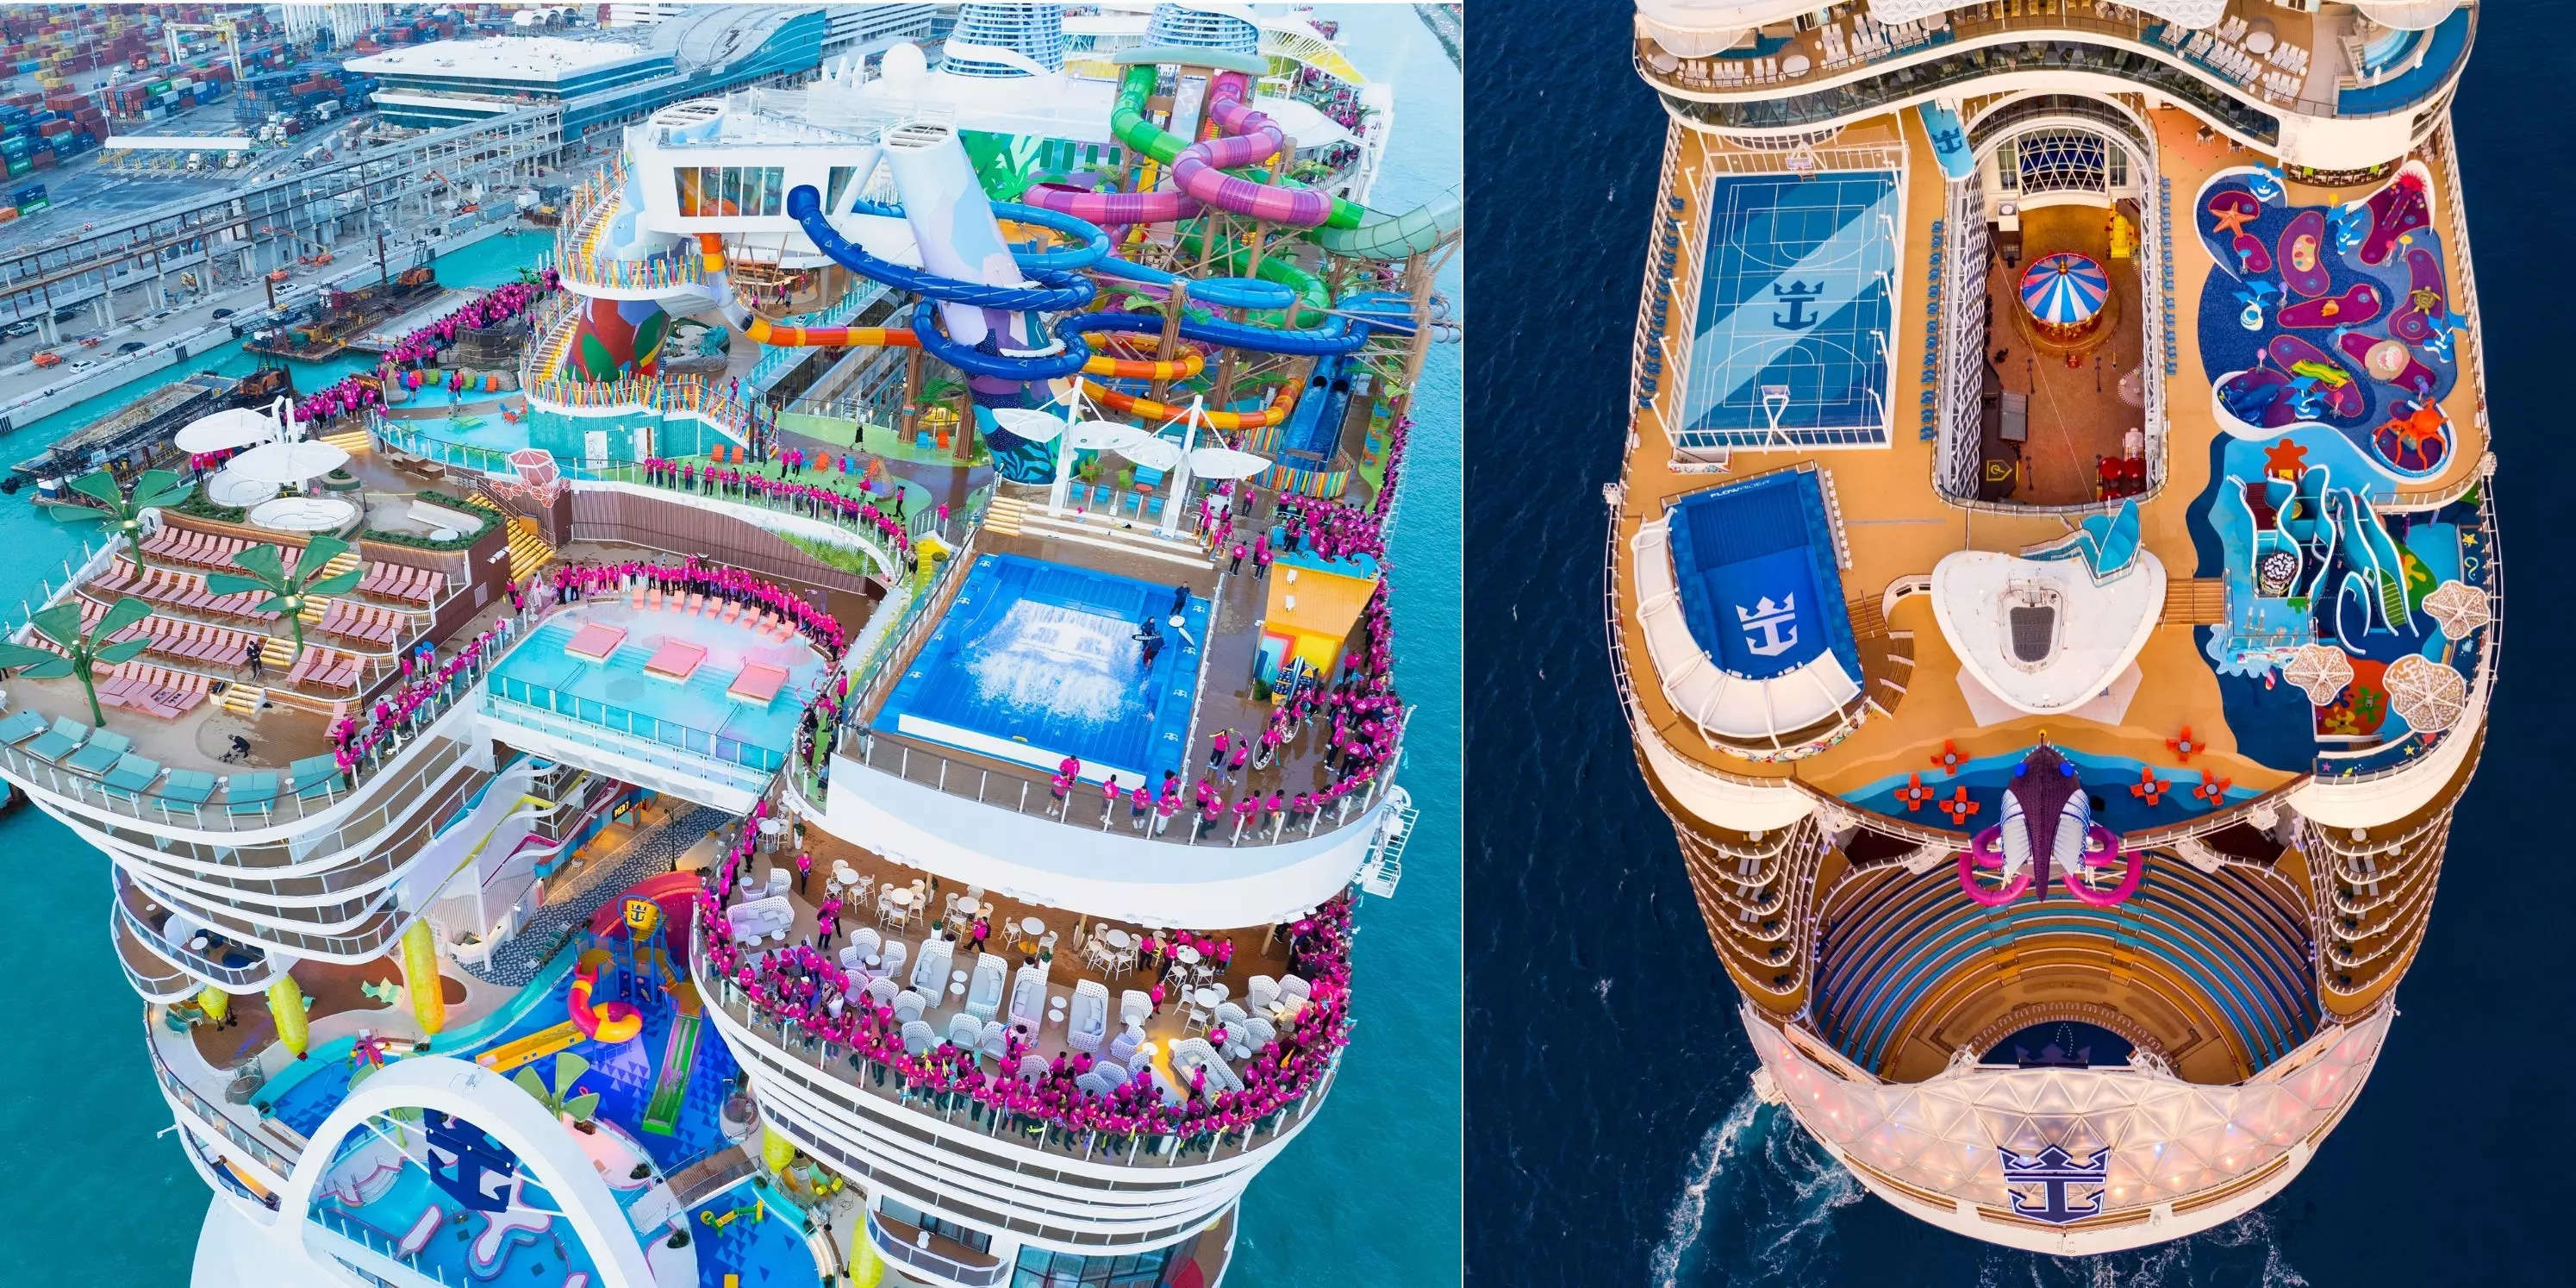 Icon of the Seas (left) and Wonder of the seas (right) close up